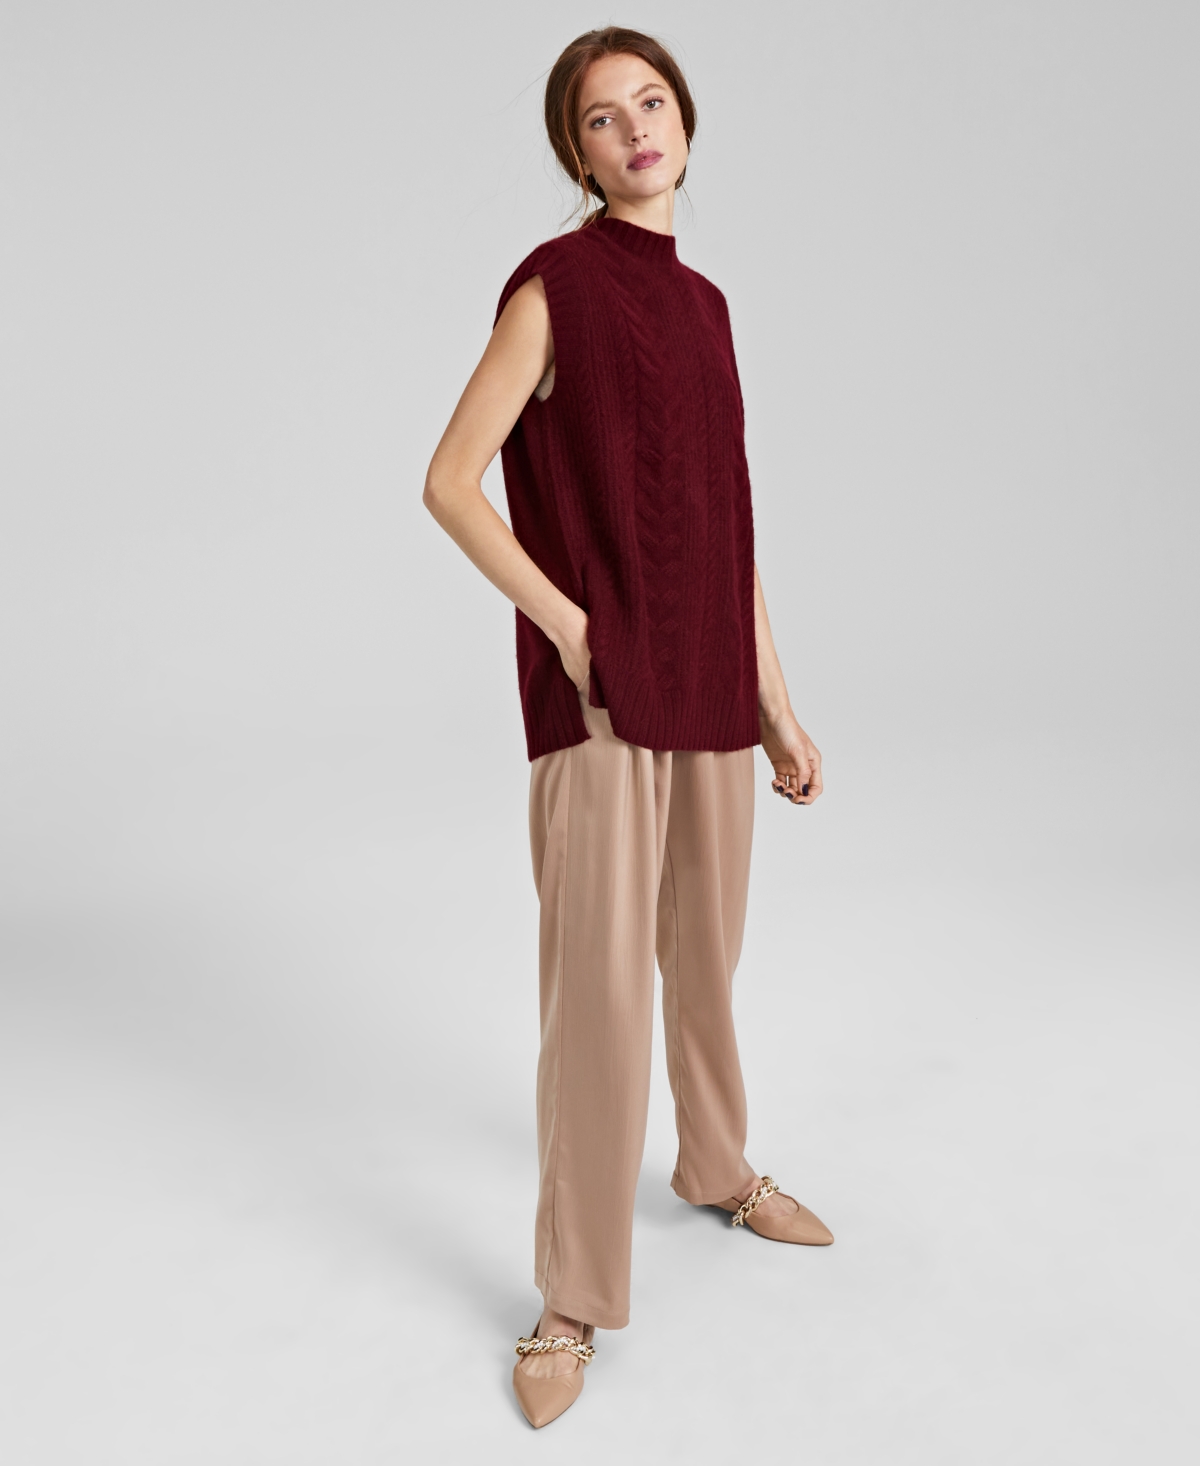 Charter Club Women's 100% Cashmere Cable-Knit Tunic, Created for Macy's